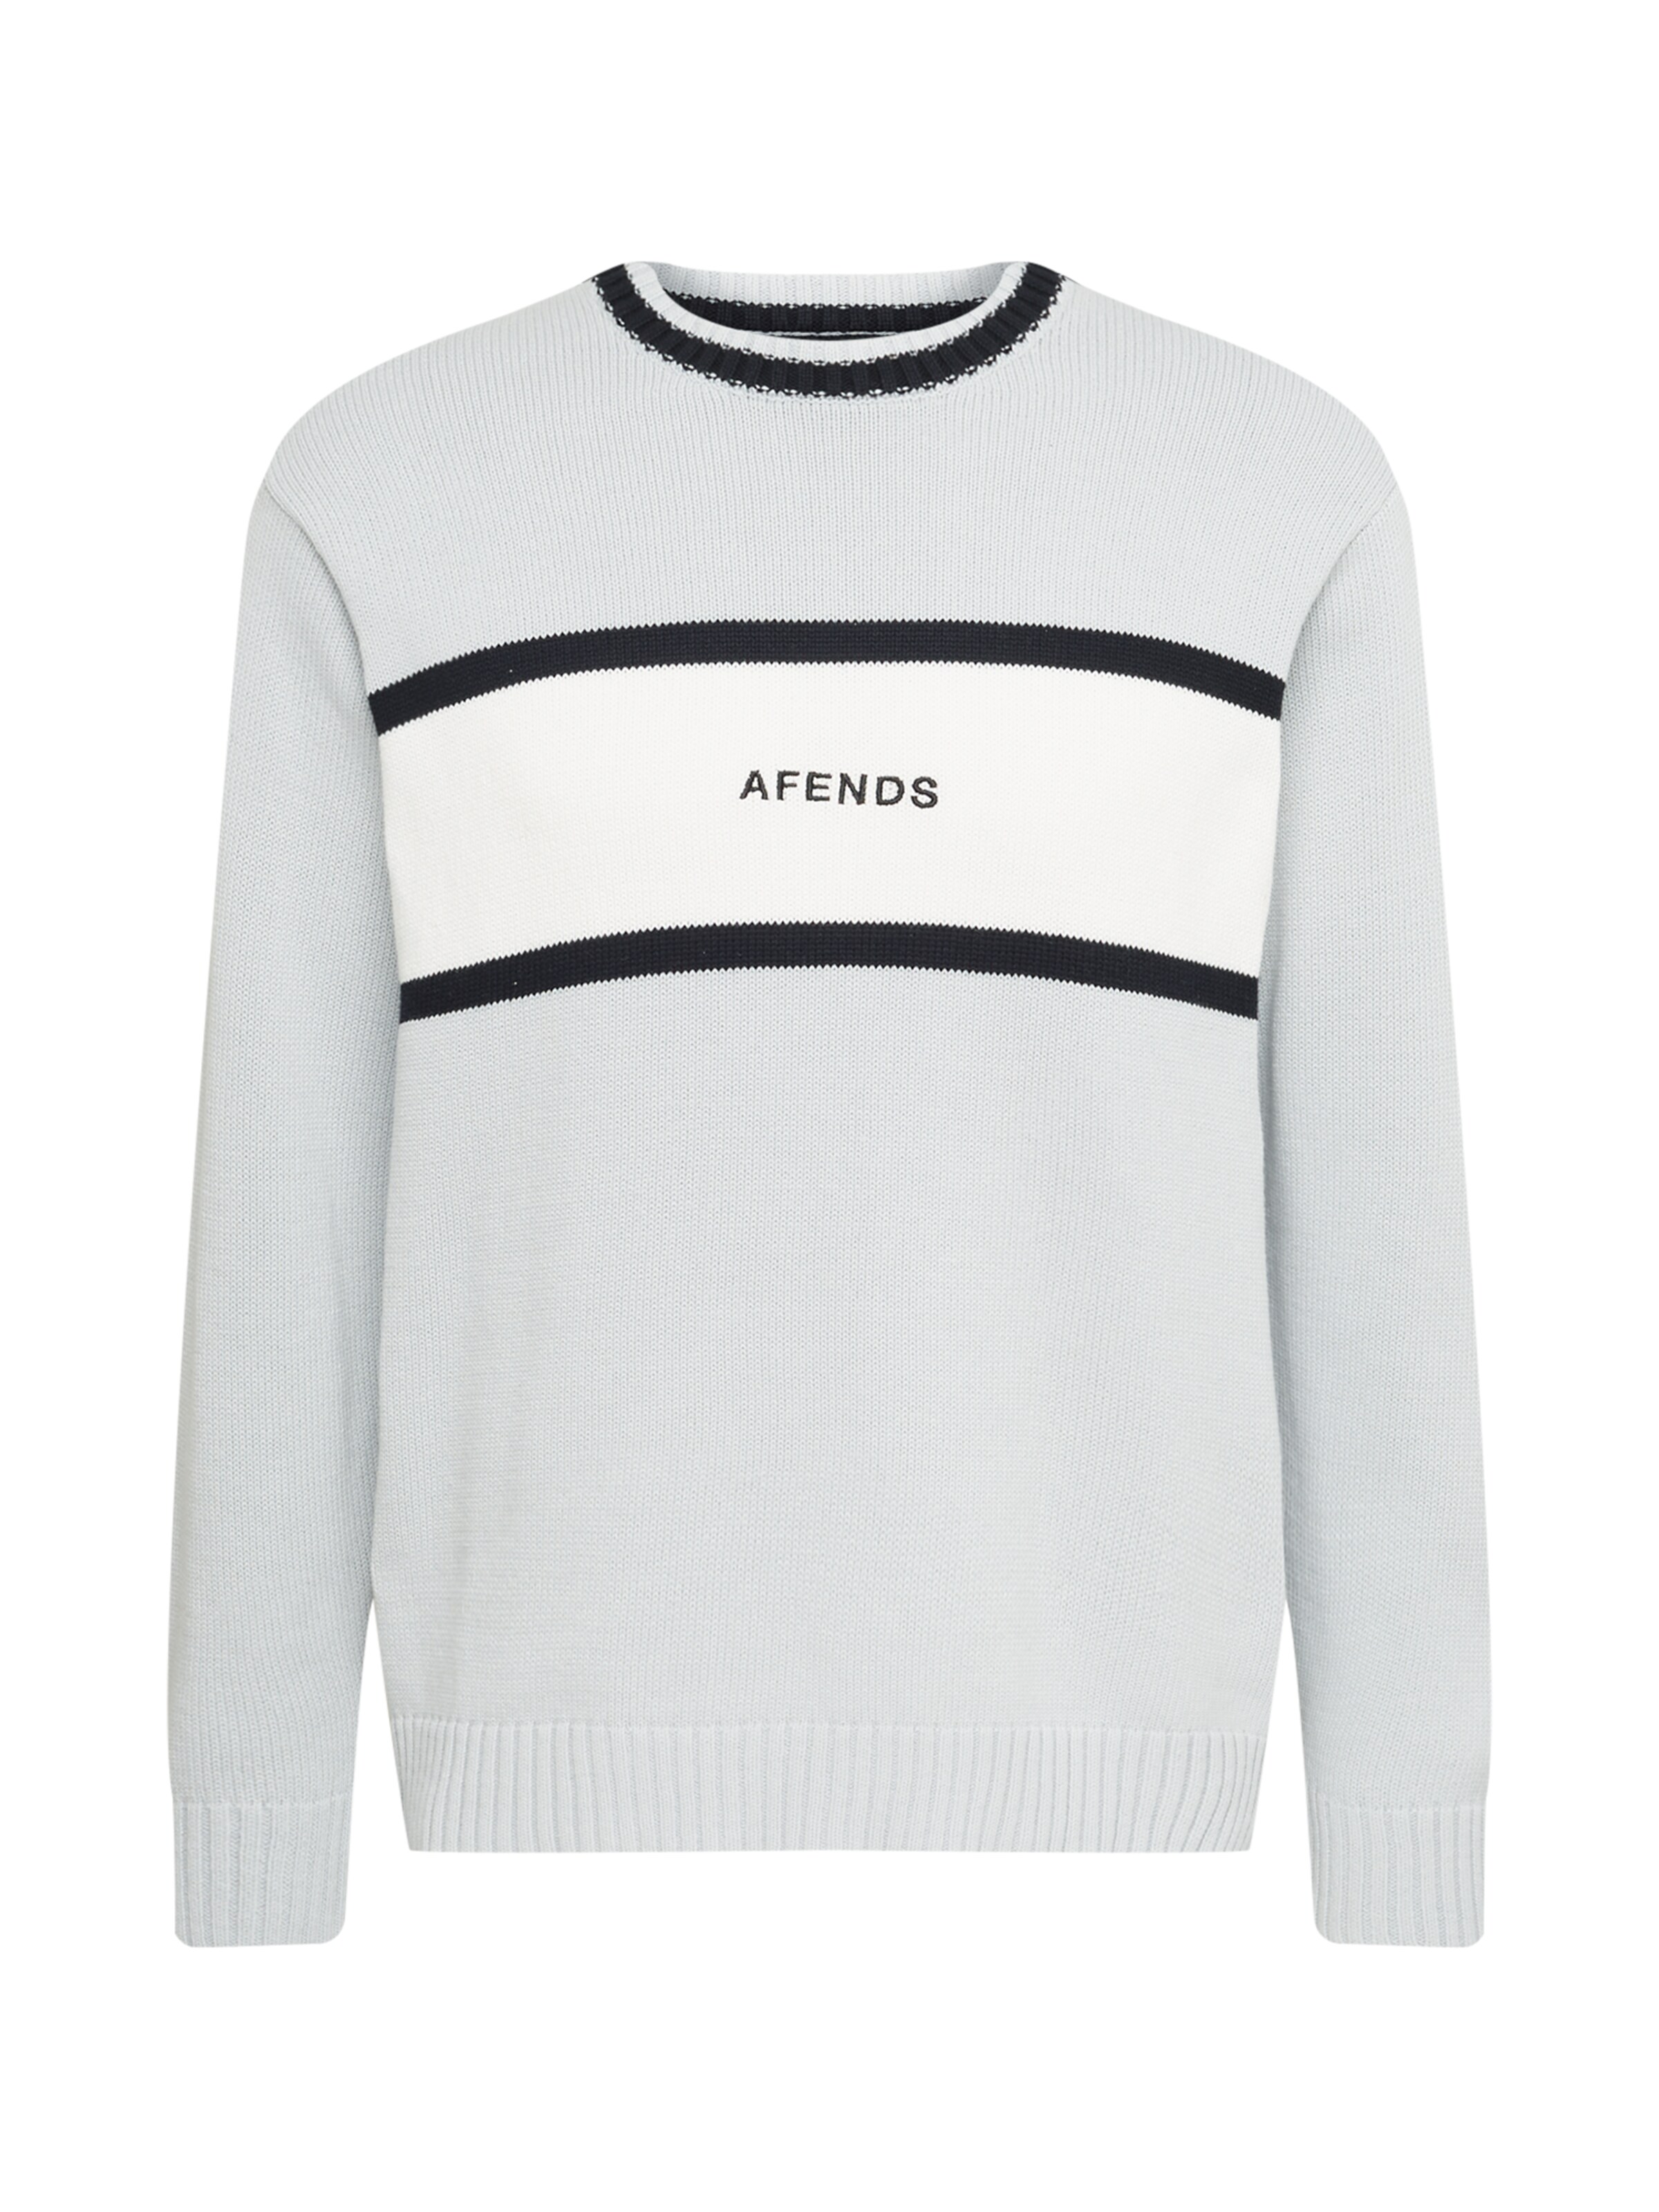 Men Sweaters & cardigans | Afends Pullover in Silver Grey - JP86144